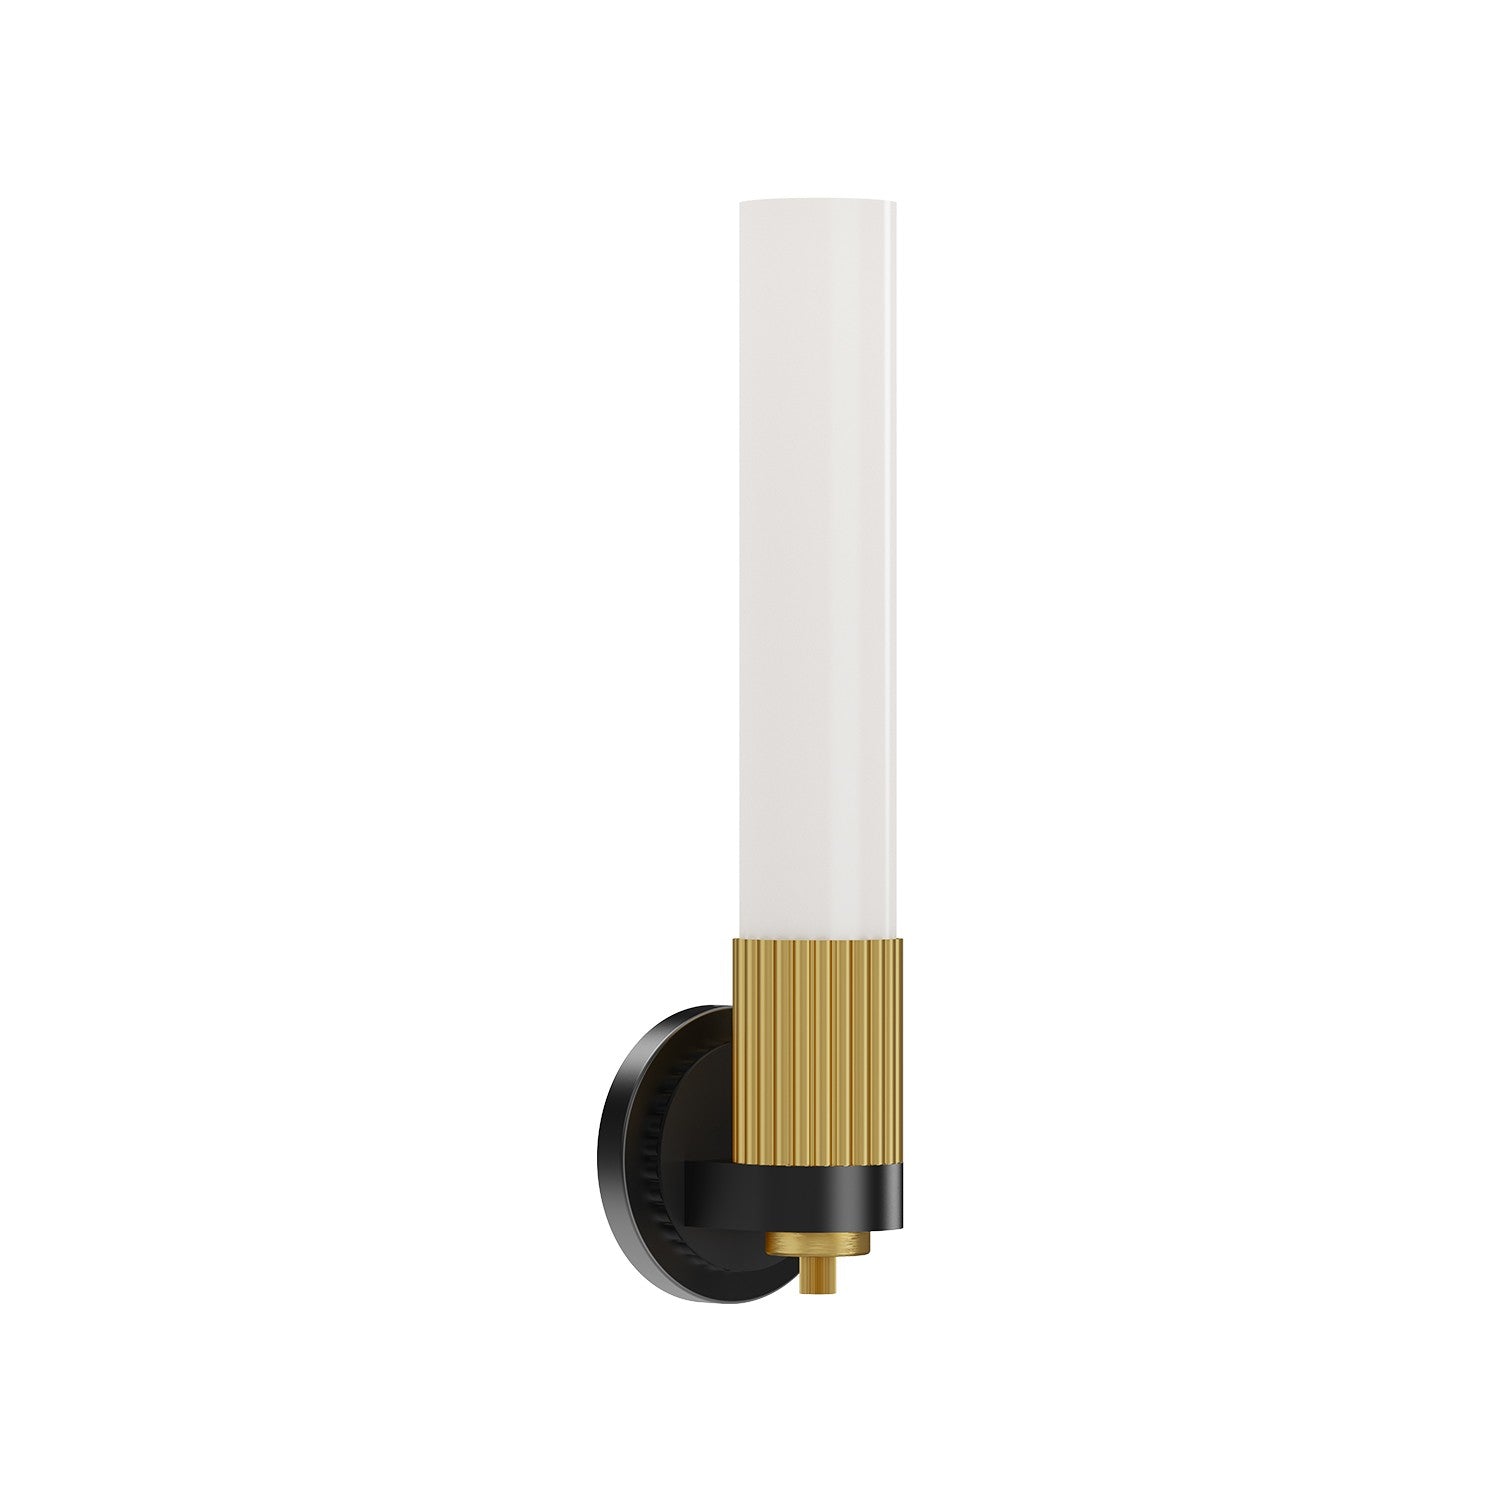 Alora Canada - WV416101MBBG - One Light Wall Sconce - Rue - Matte Black/Brushed Gold